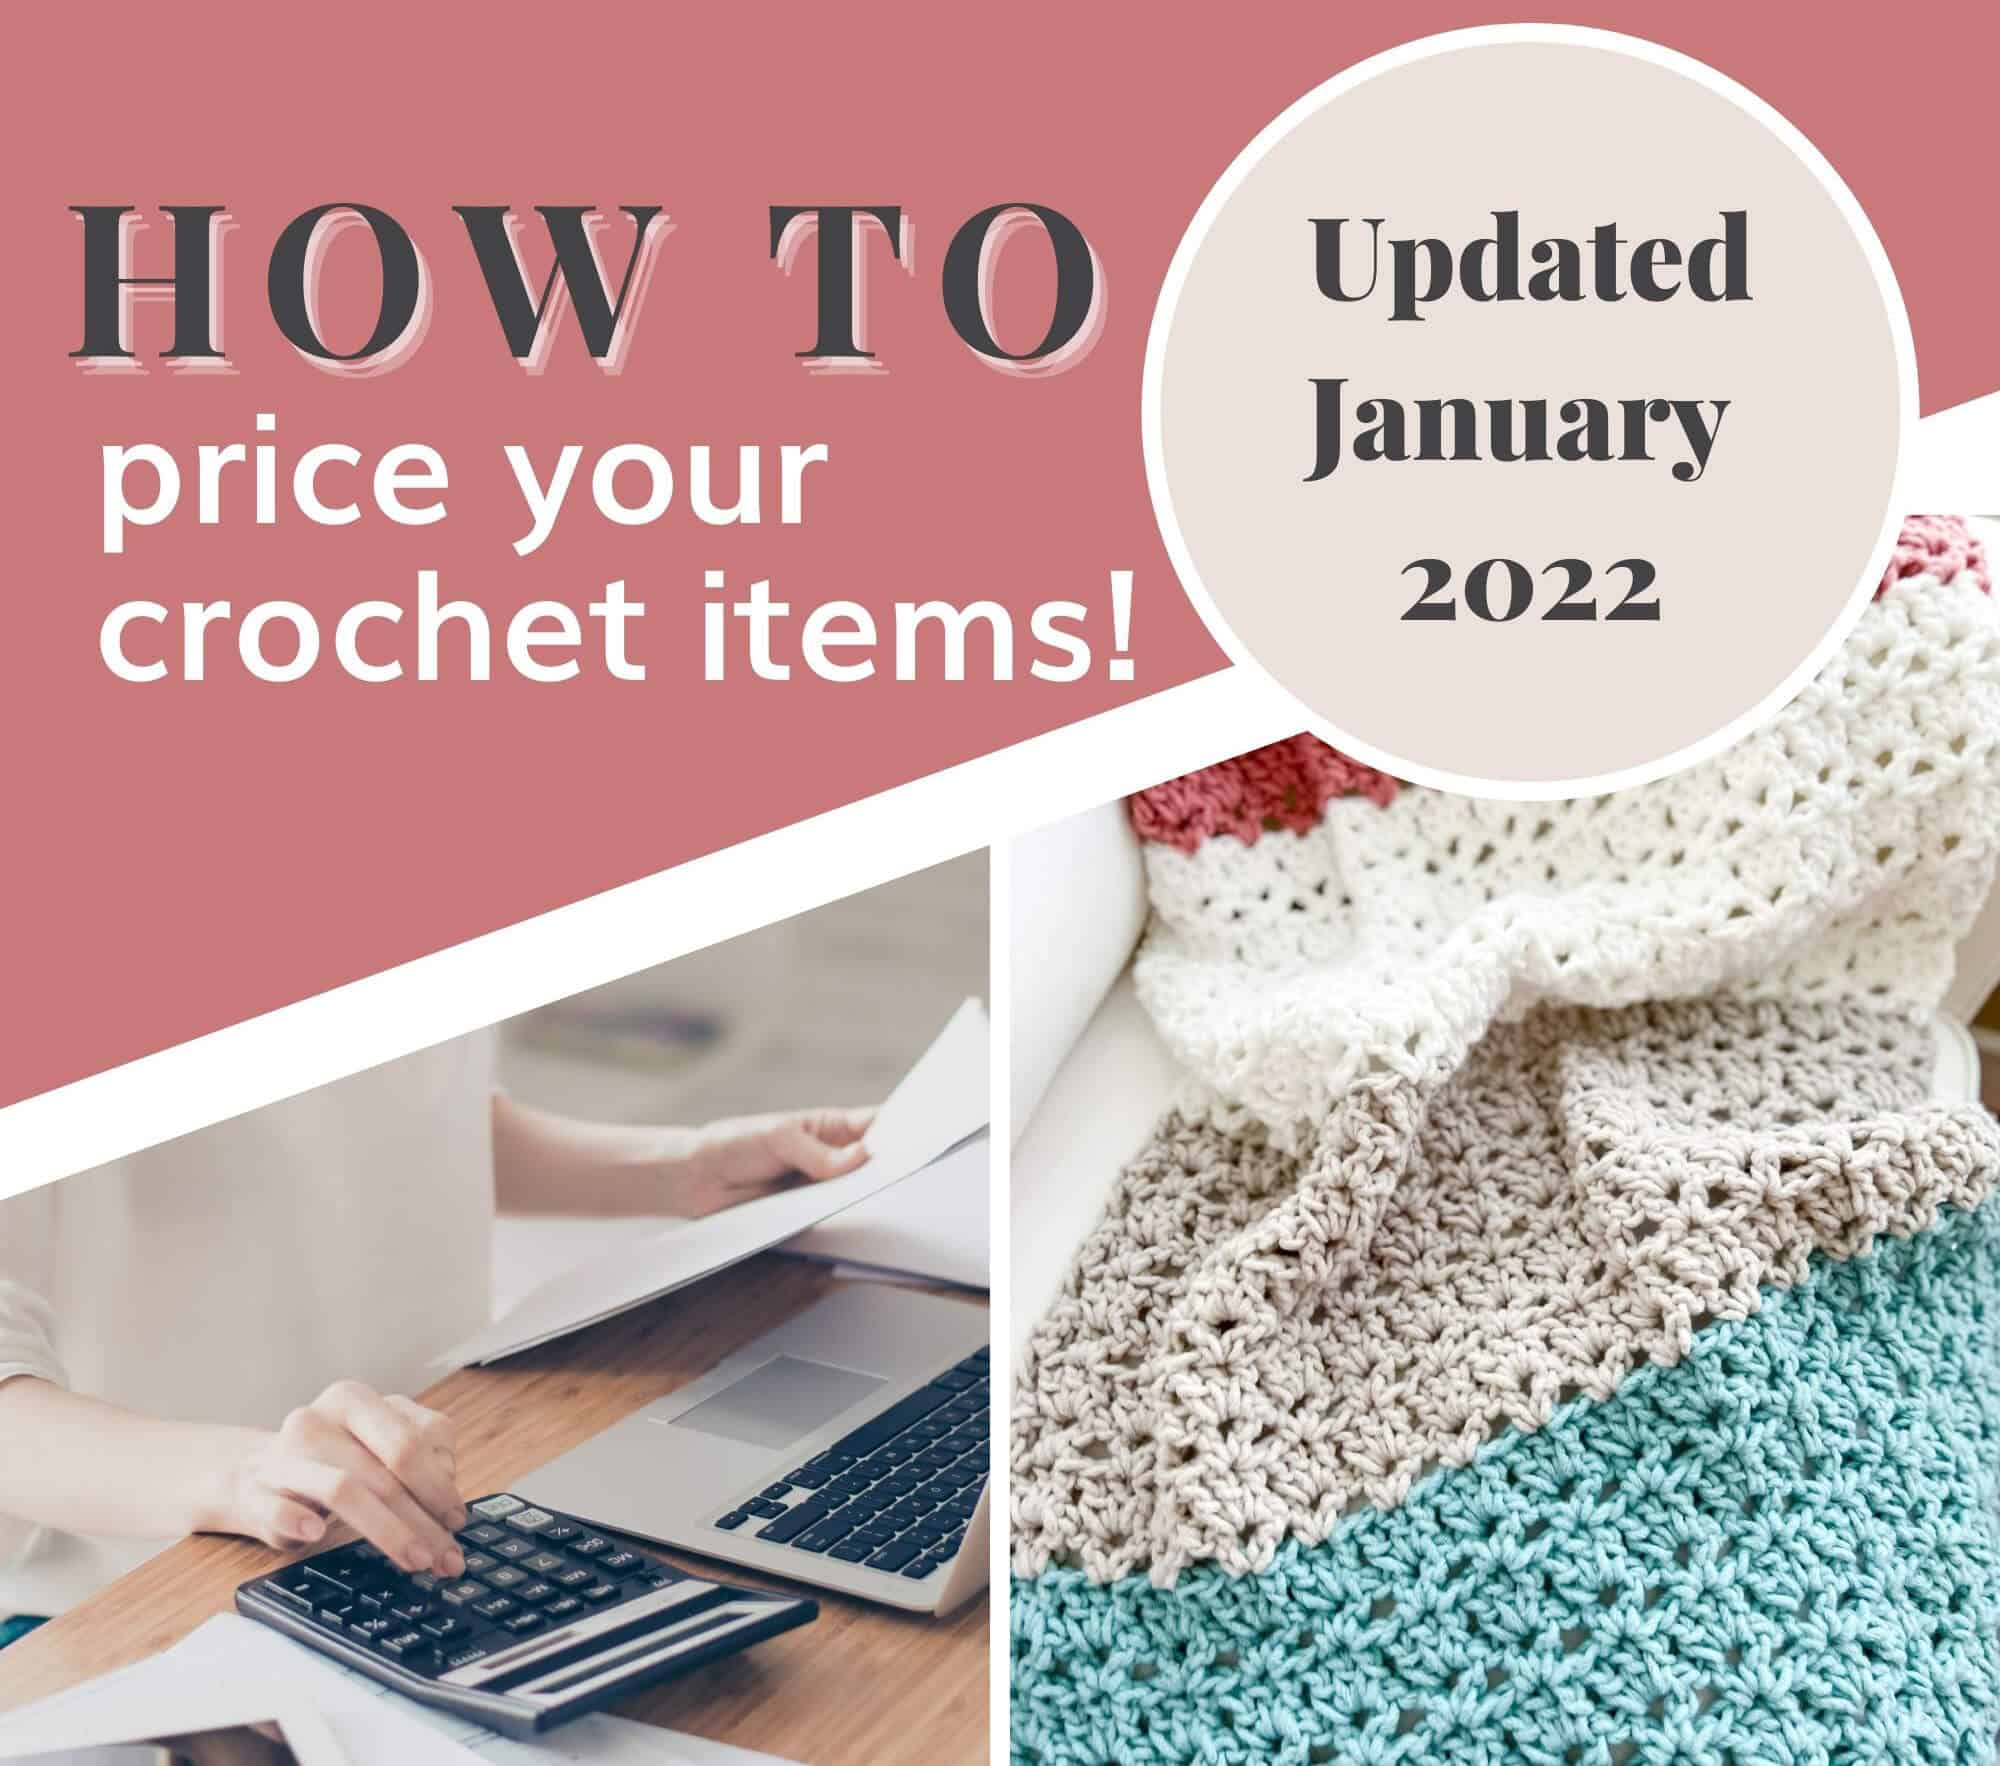 How to price your crochet items in 2022